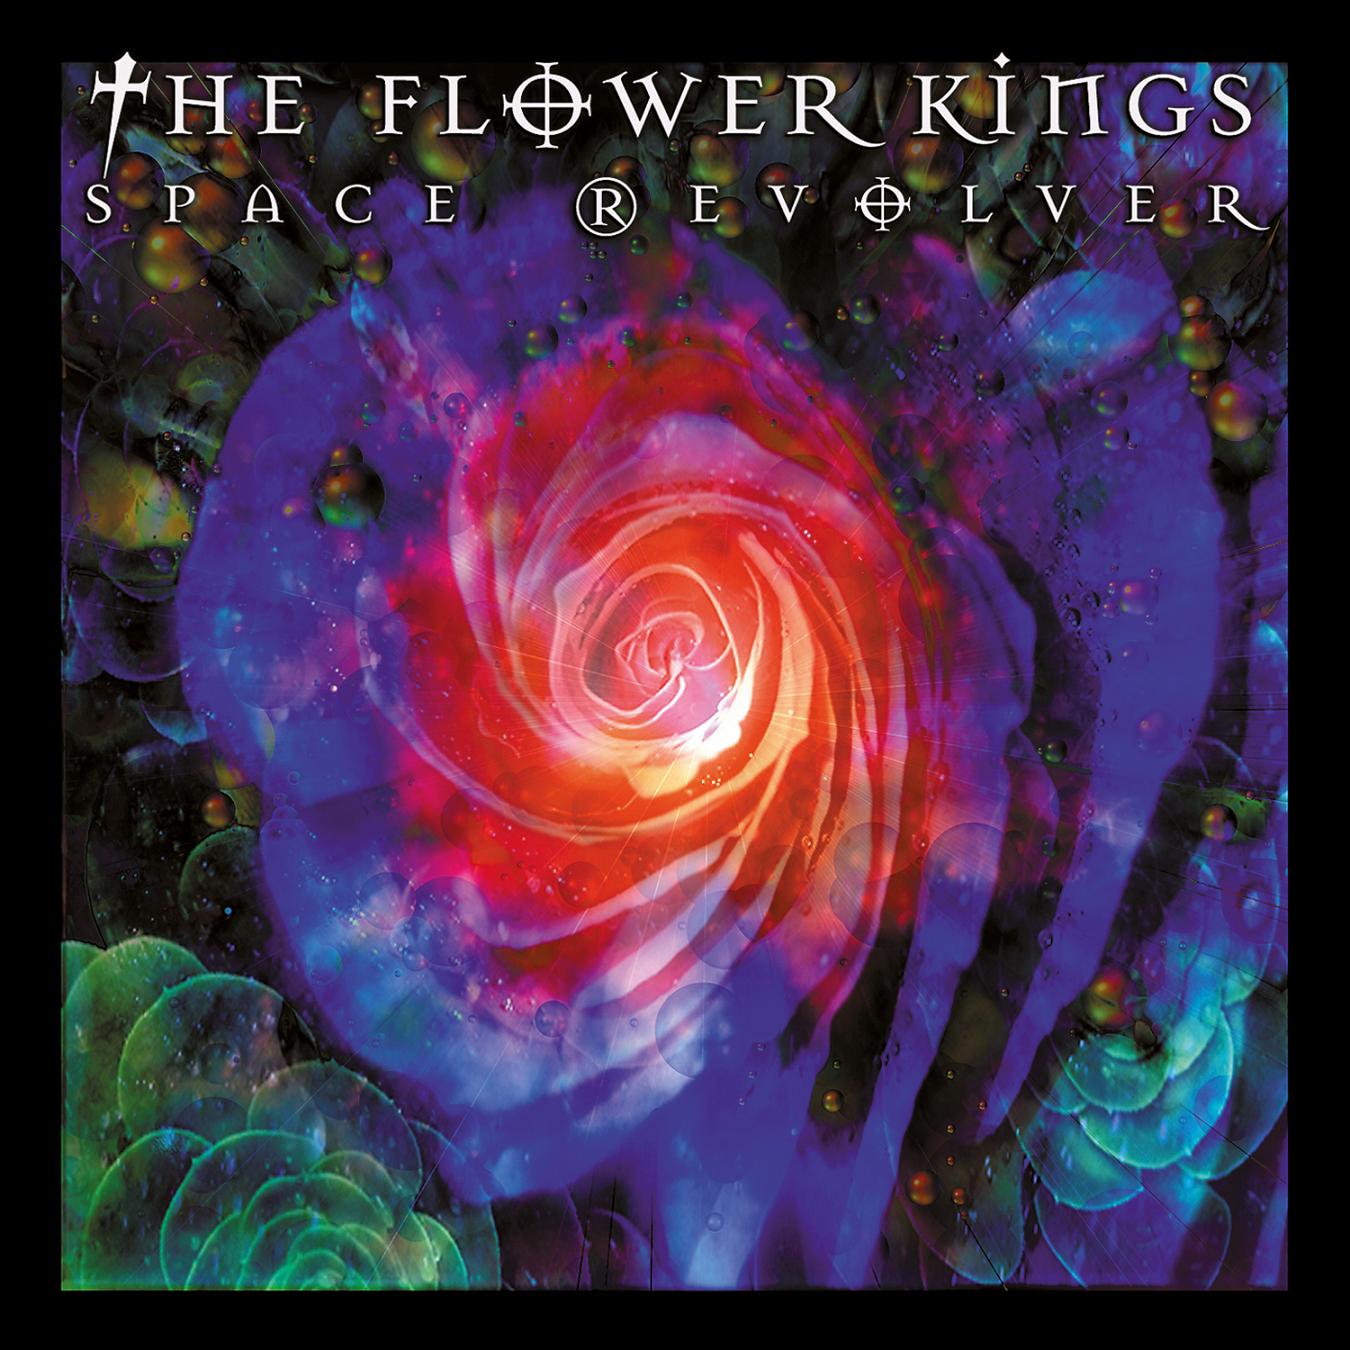 The Flower Kings - Space Revolver (2000)